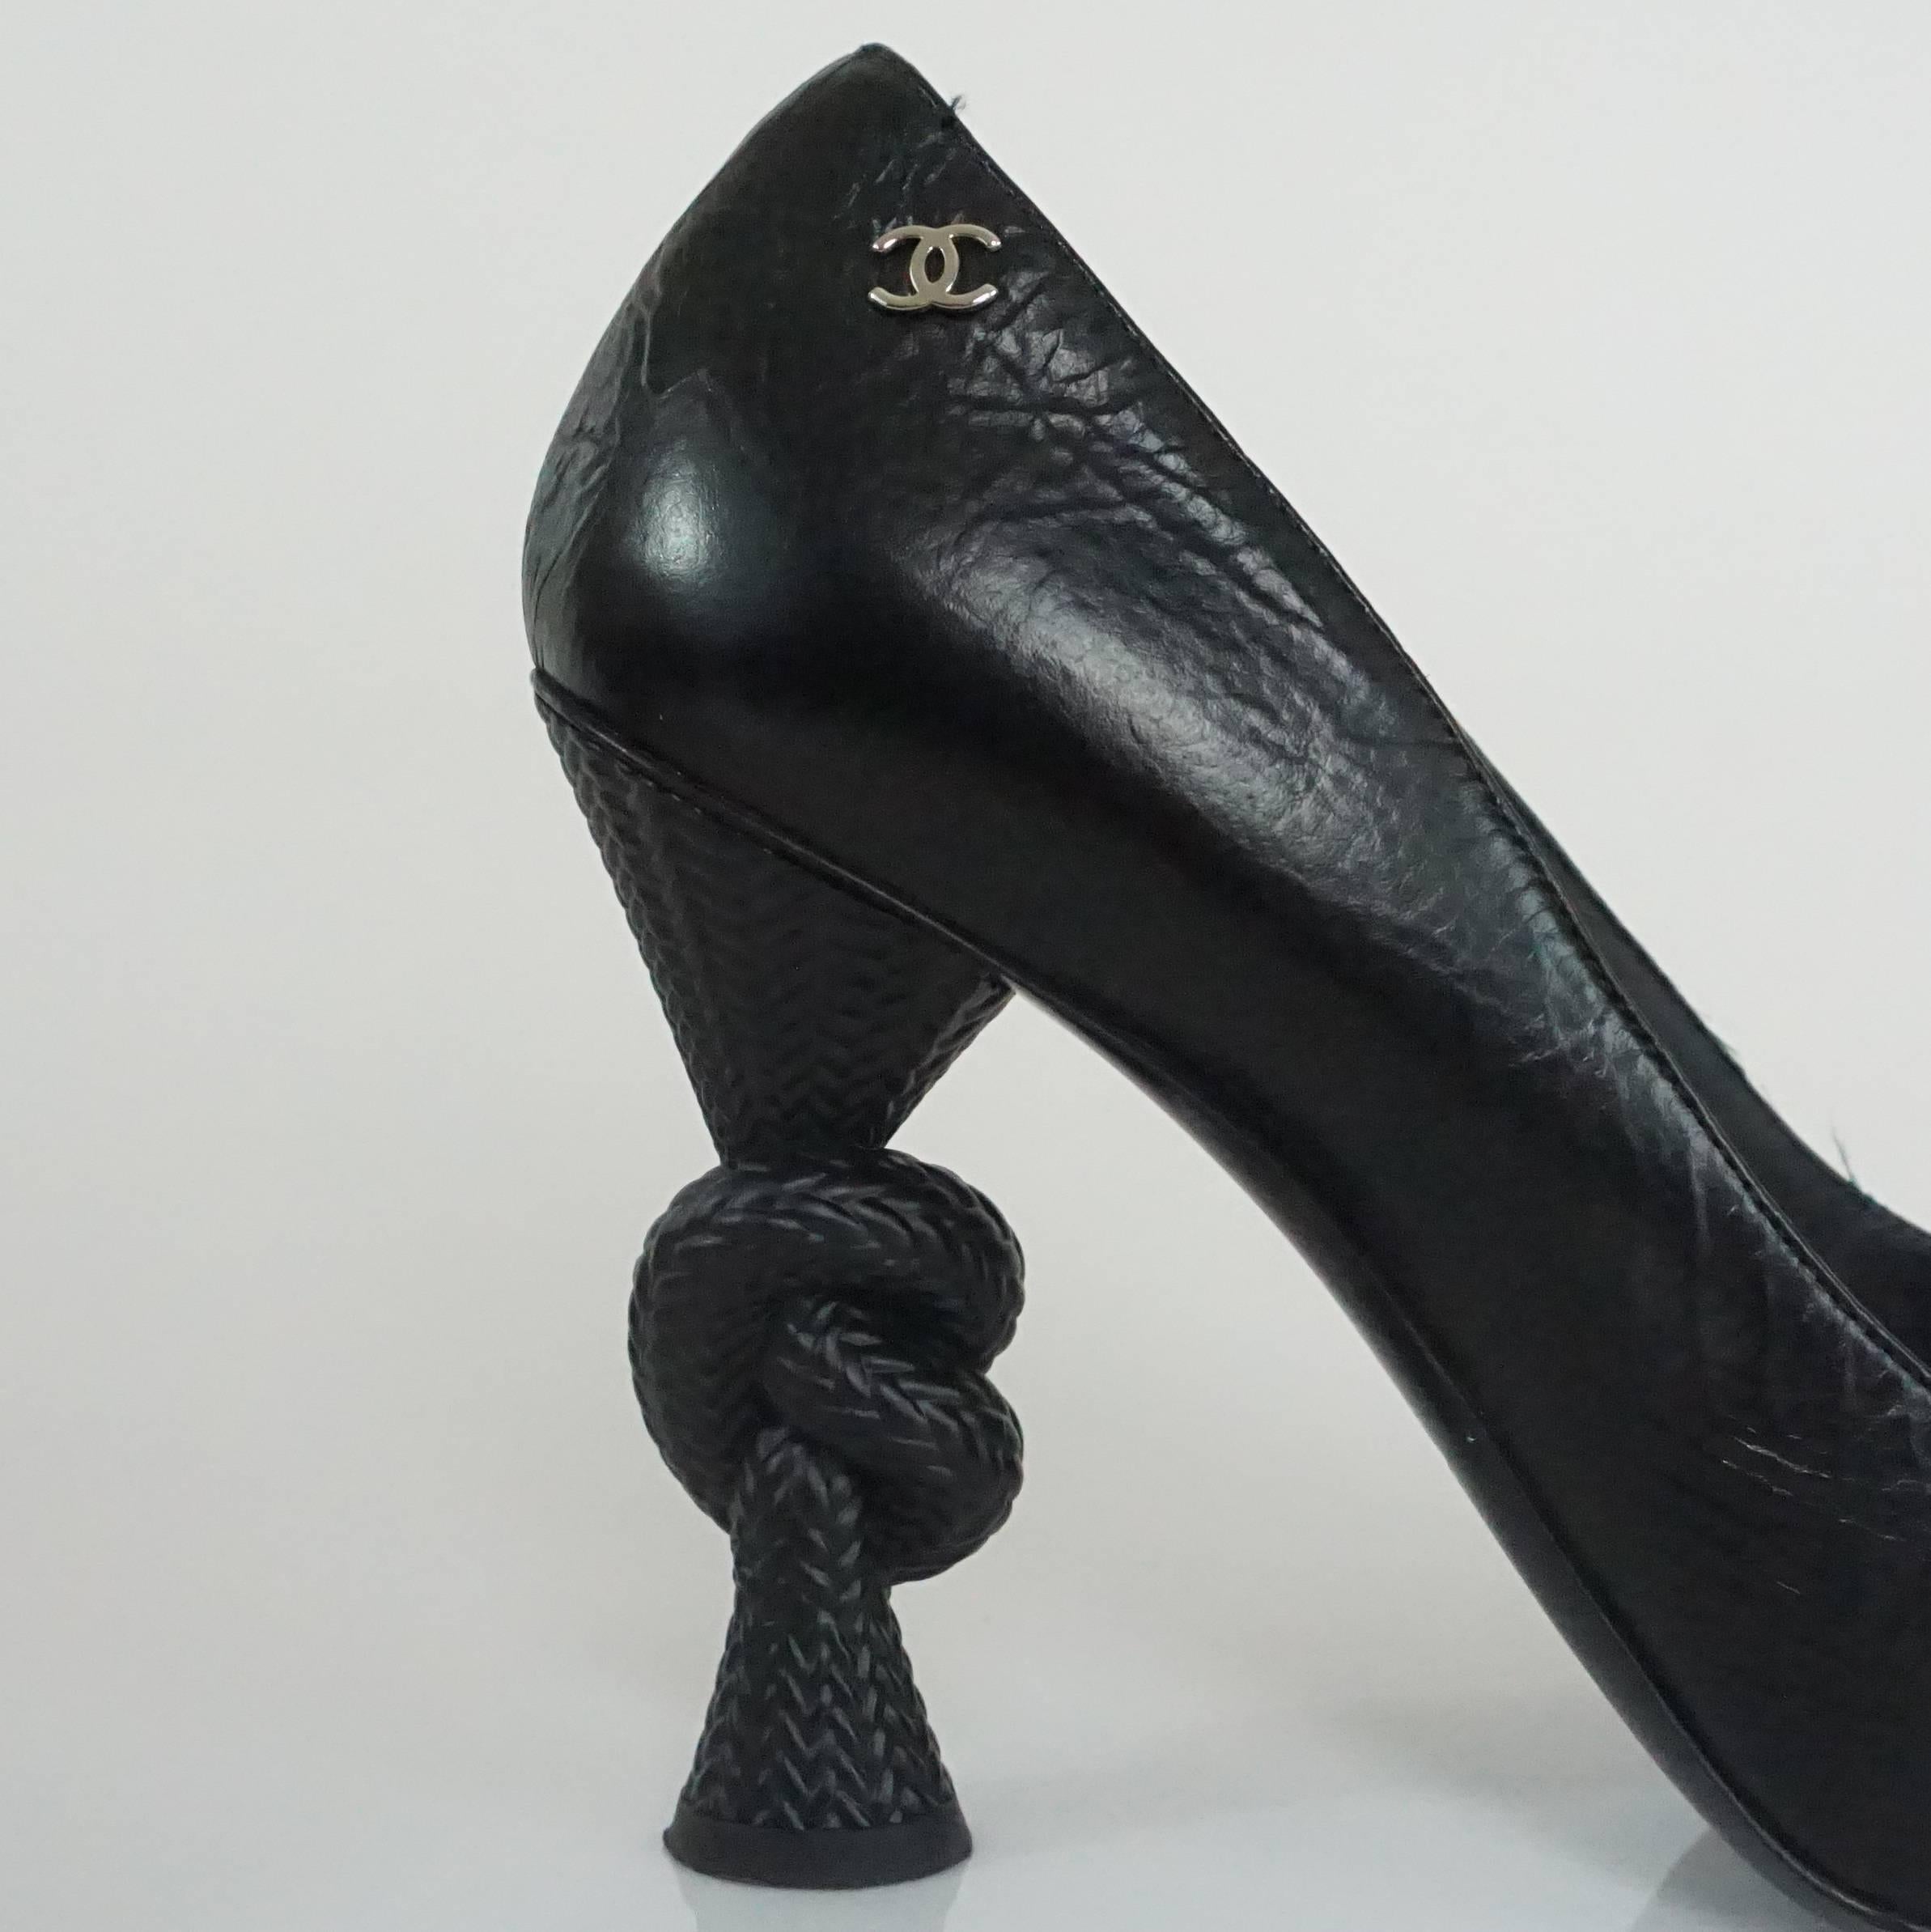 Chanel Black Leather and Patent Pump w/ Rope Knot Heel - 40.5 2